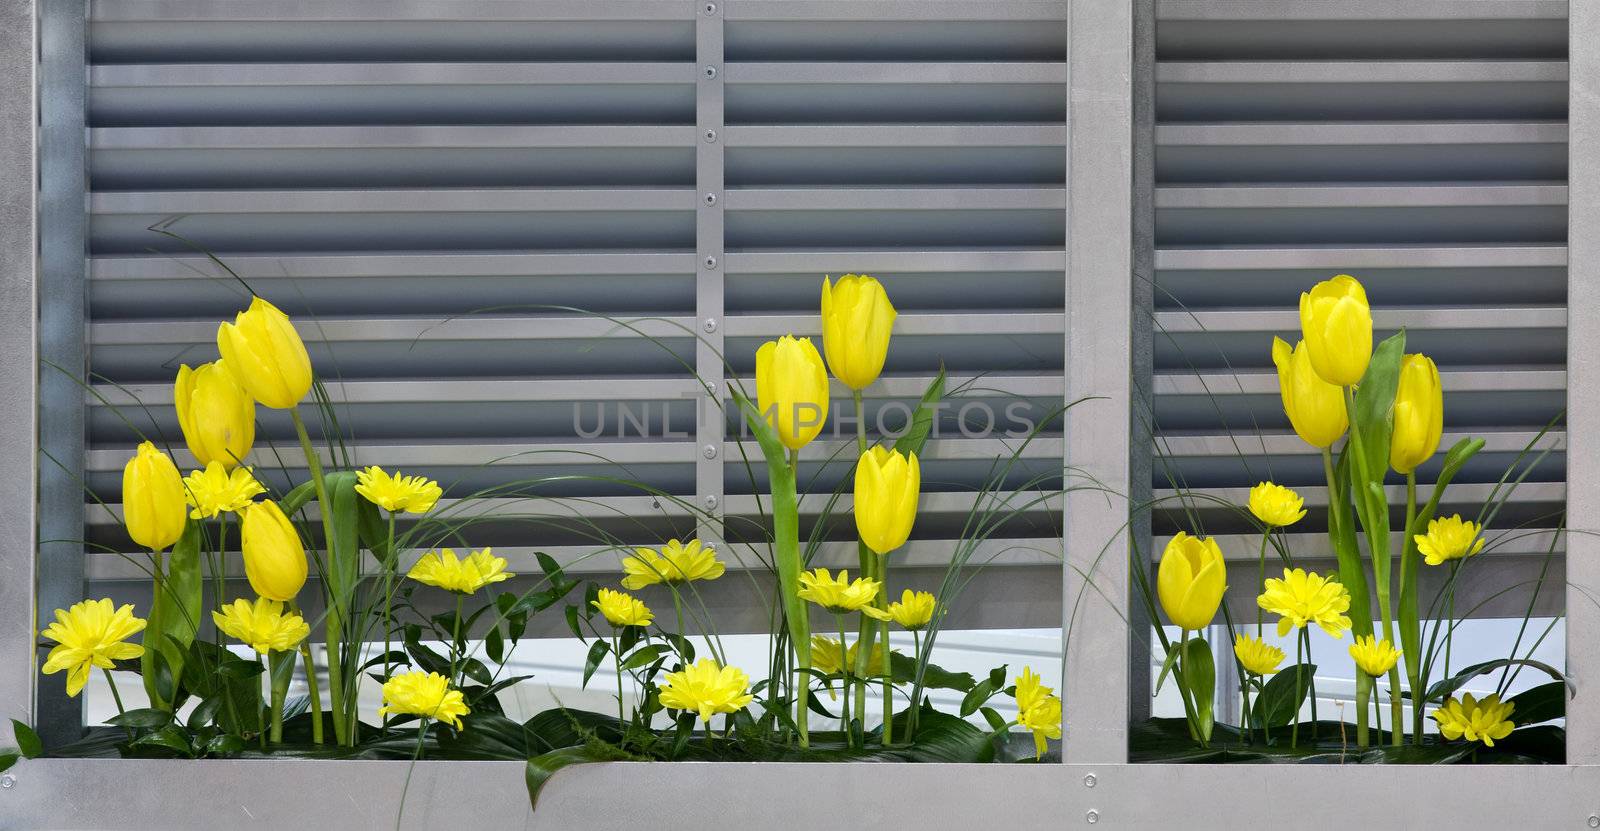 Yellow flowers near the metal ventilation grilles